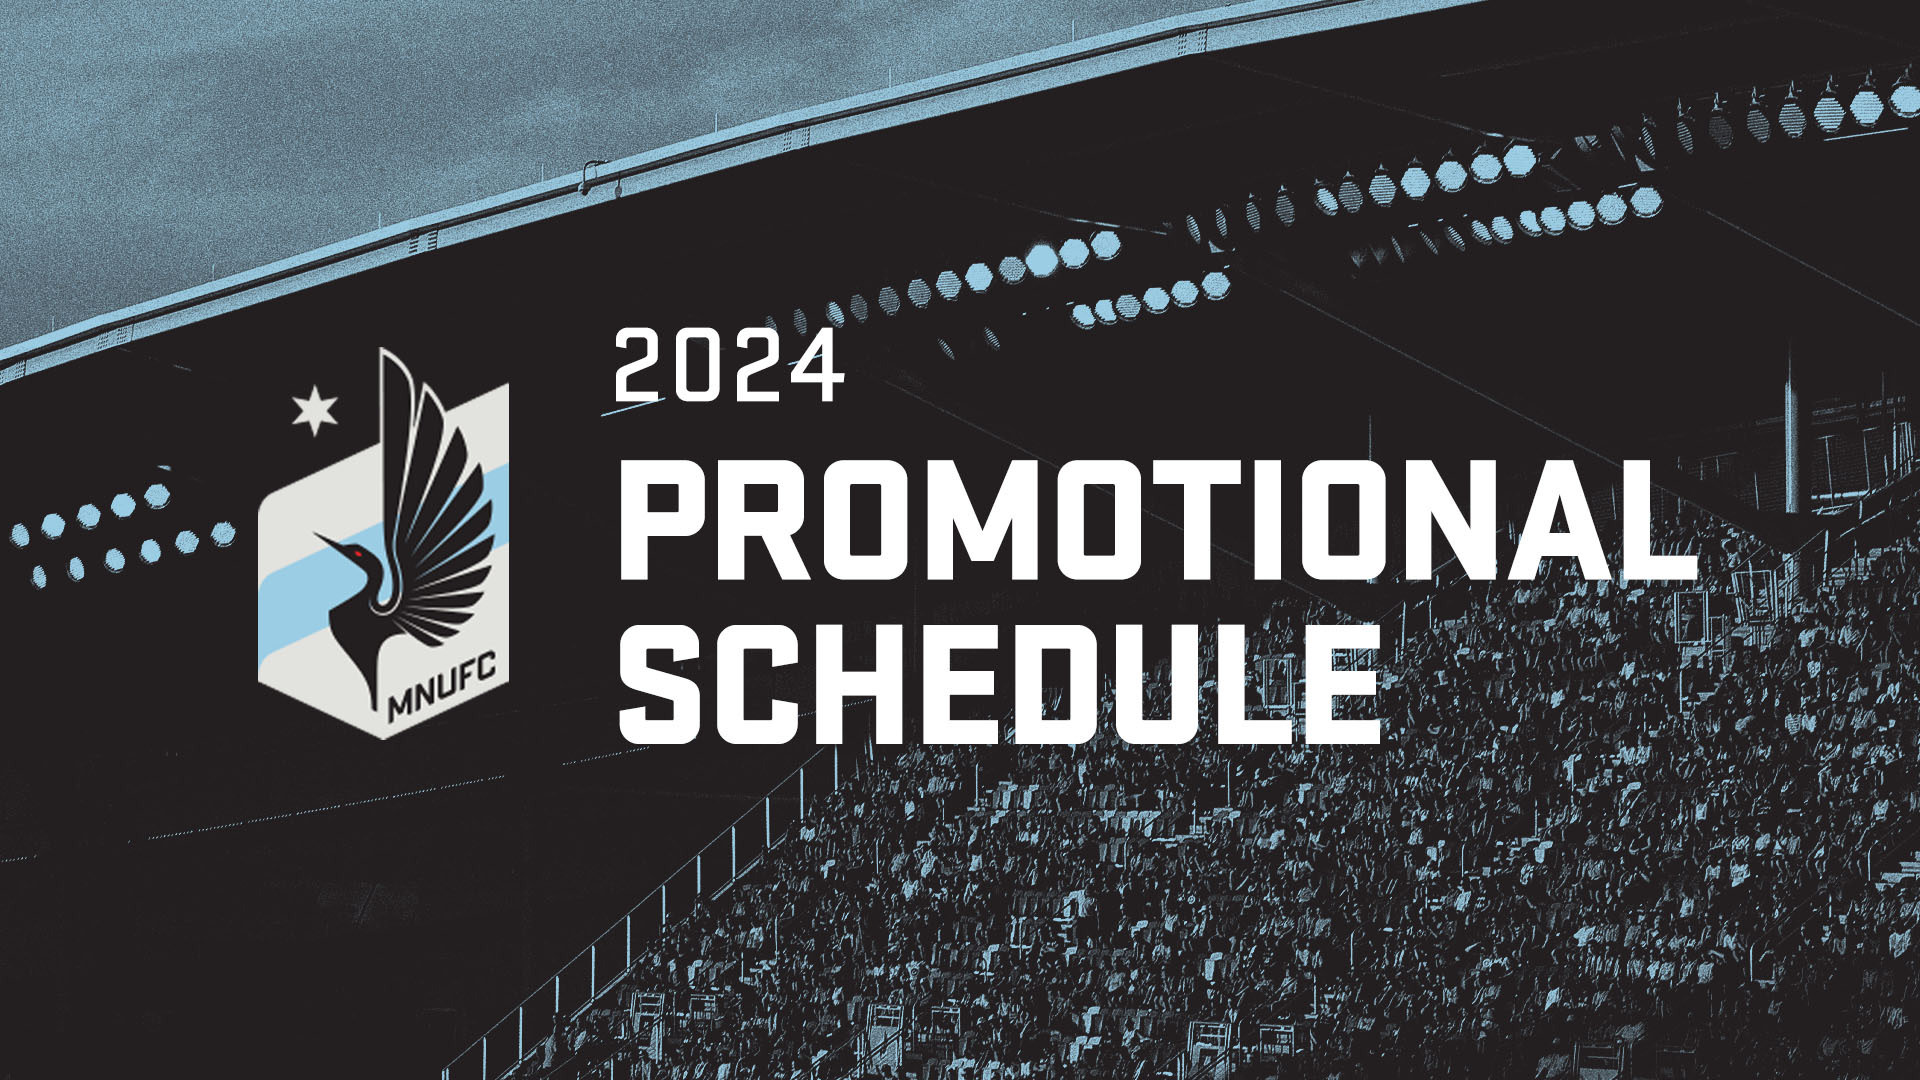 MNUFC Announce Promotional Schedule for 2024 MLS Season Minnesota